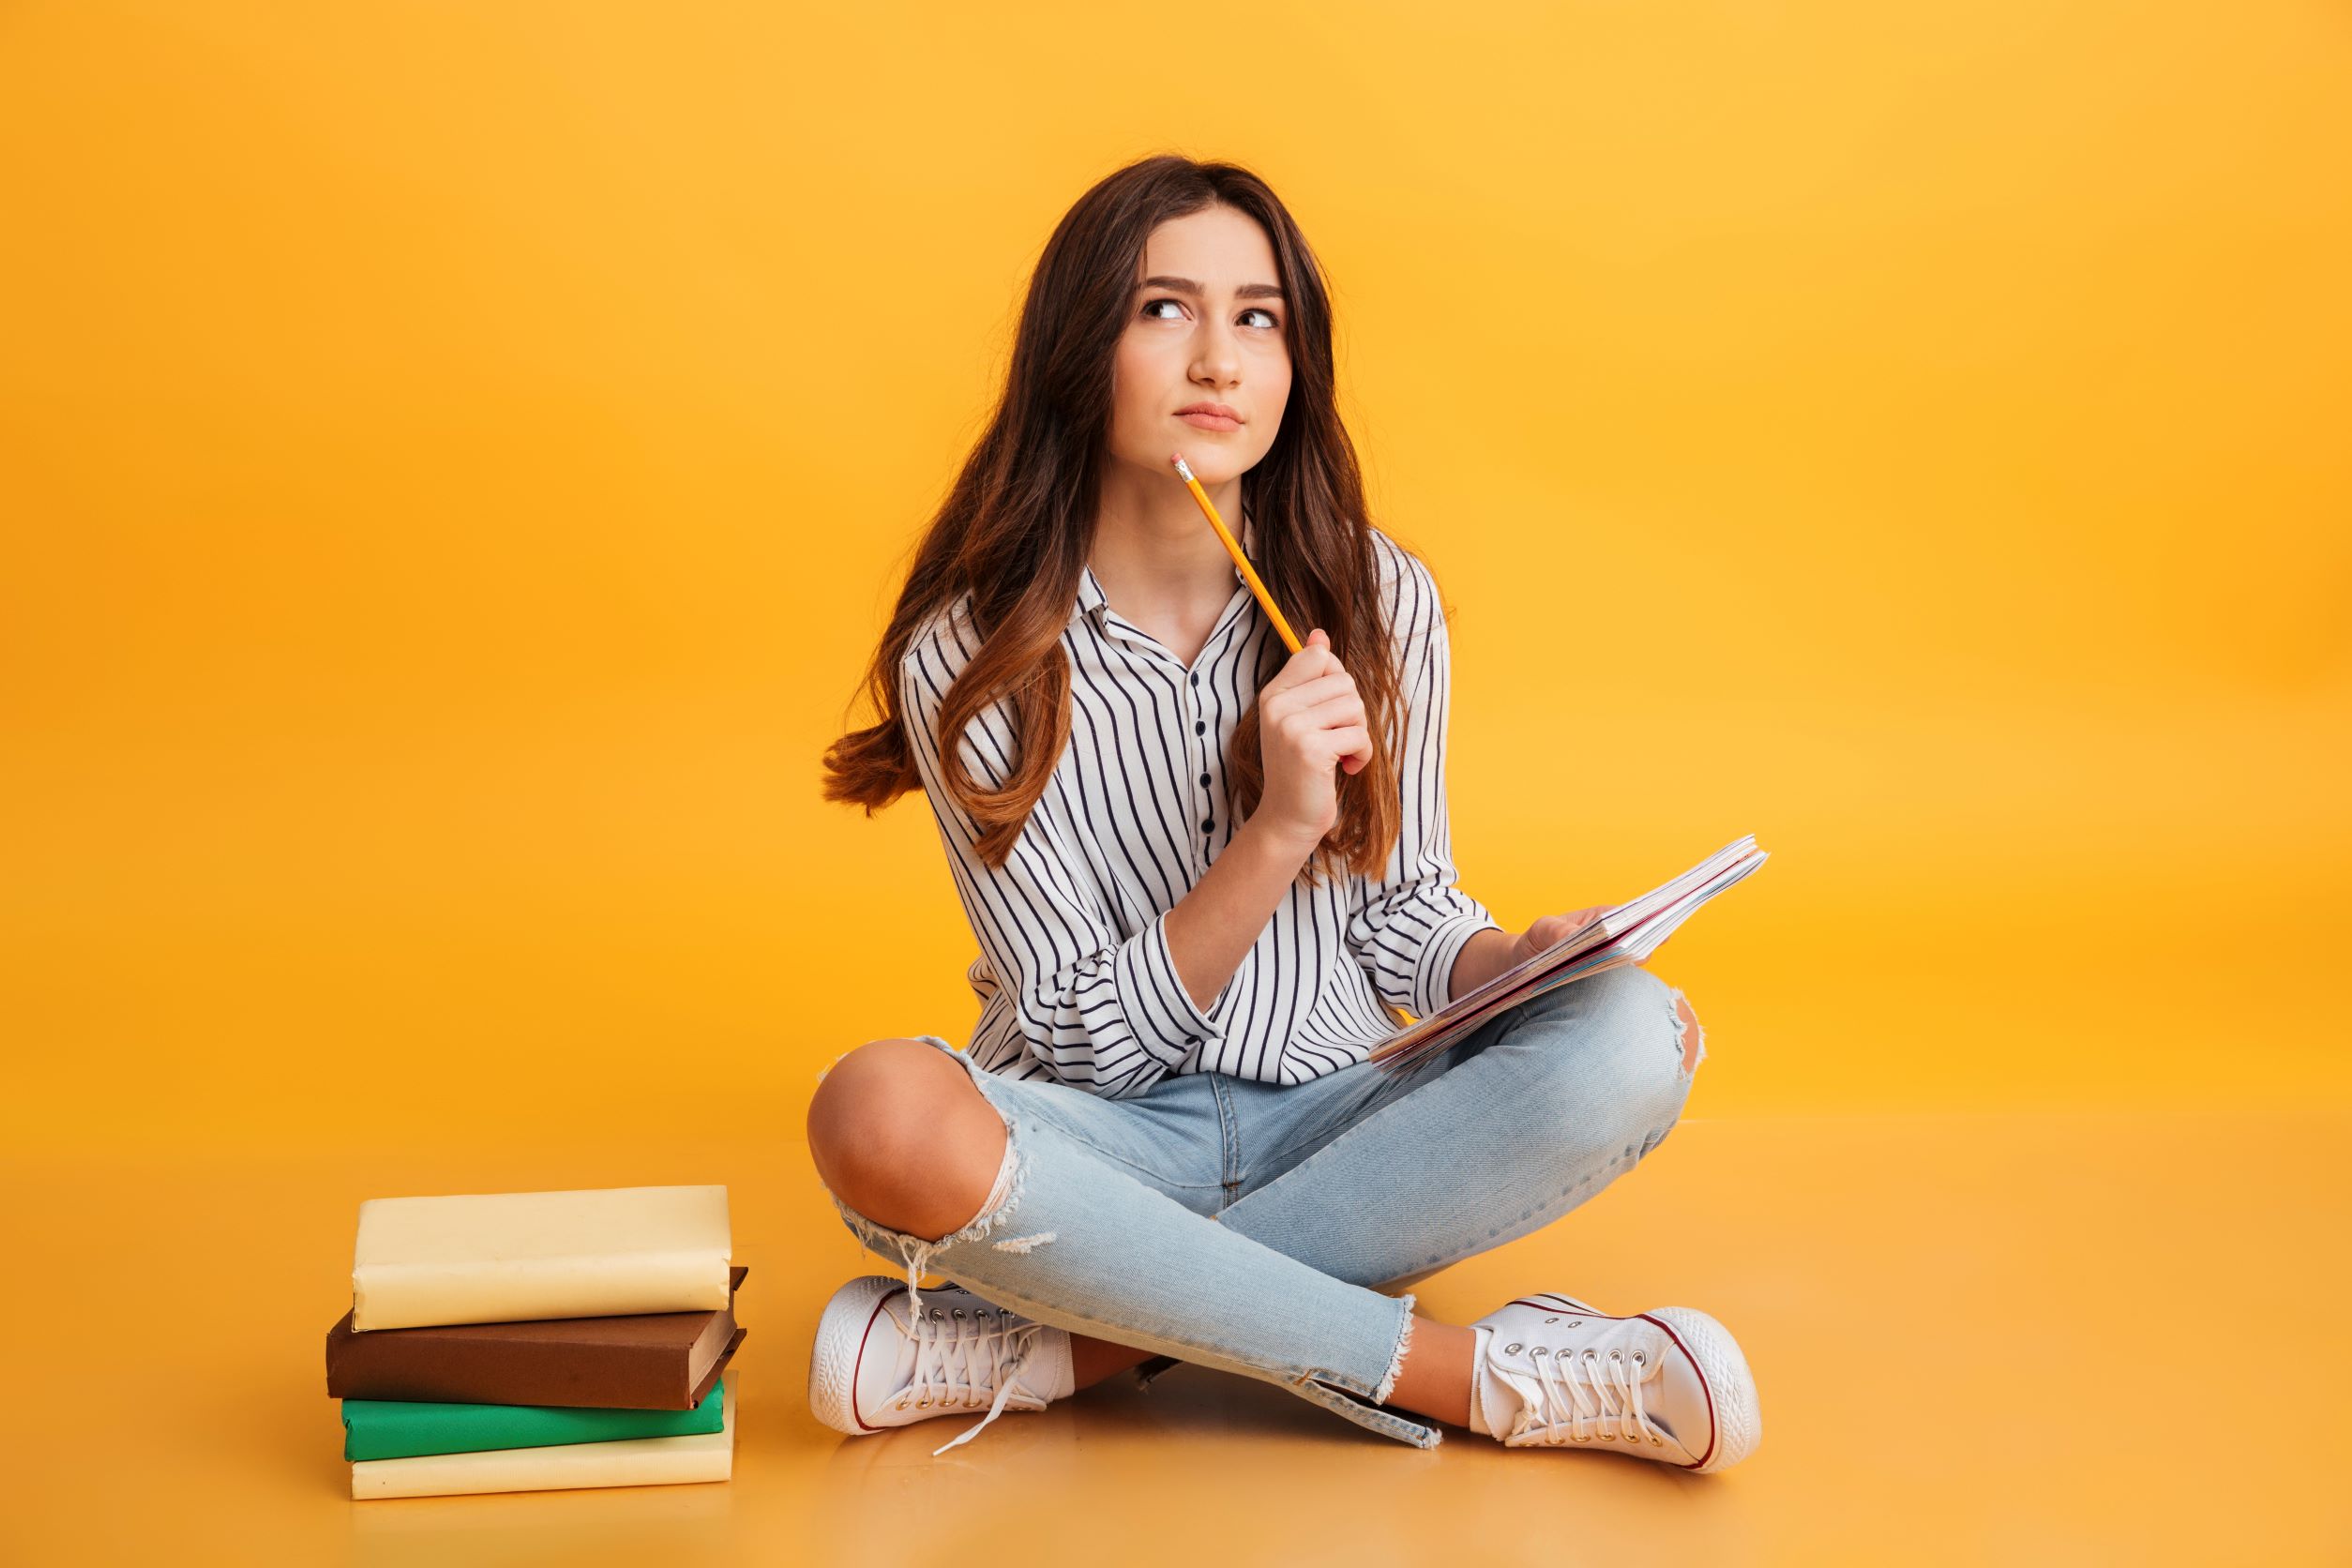 Young woman sitting cross-legged, with a pencil and paper and a stack of books, looking pensive